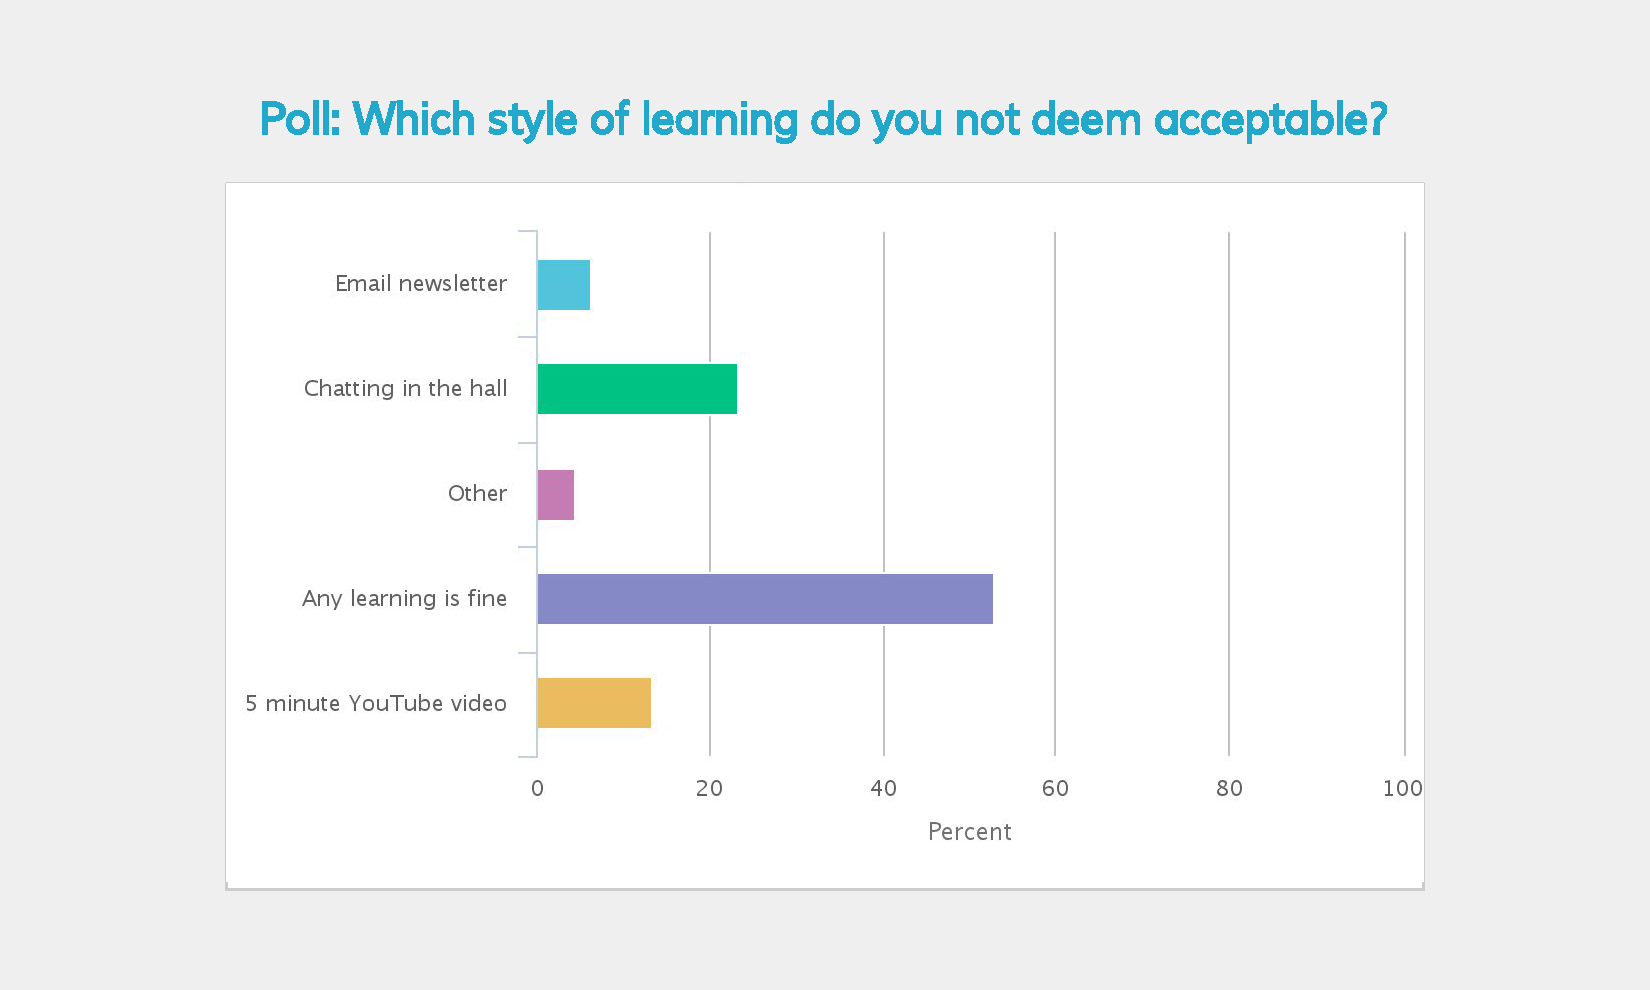 Styles of learning